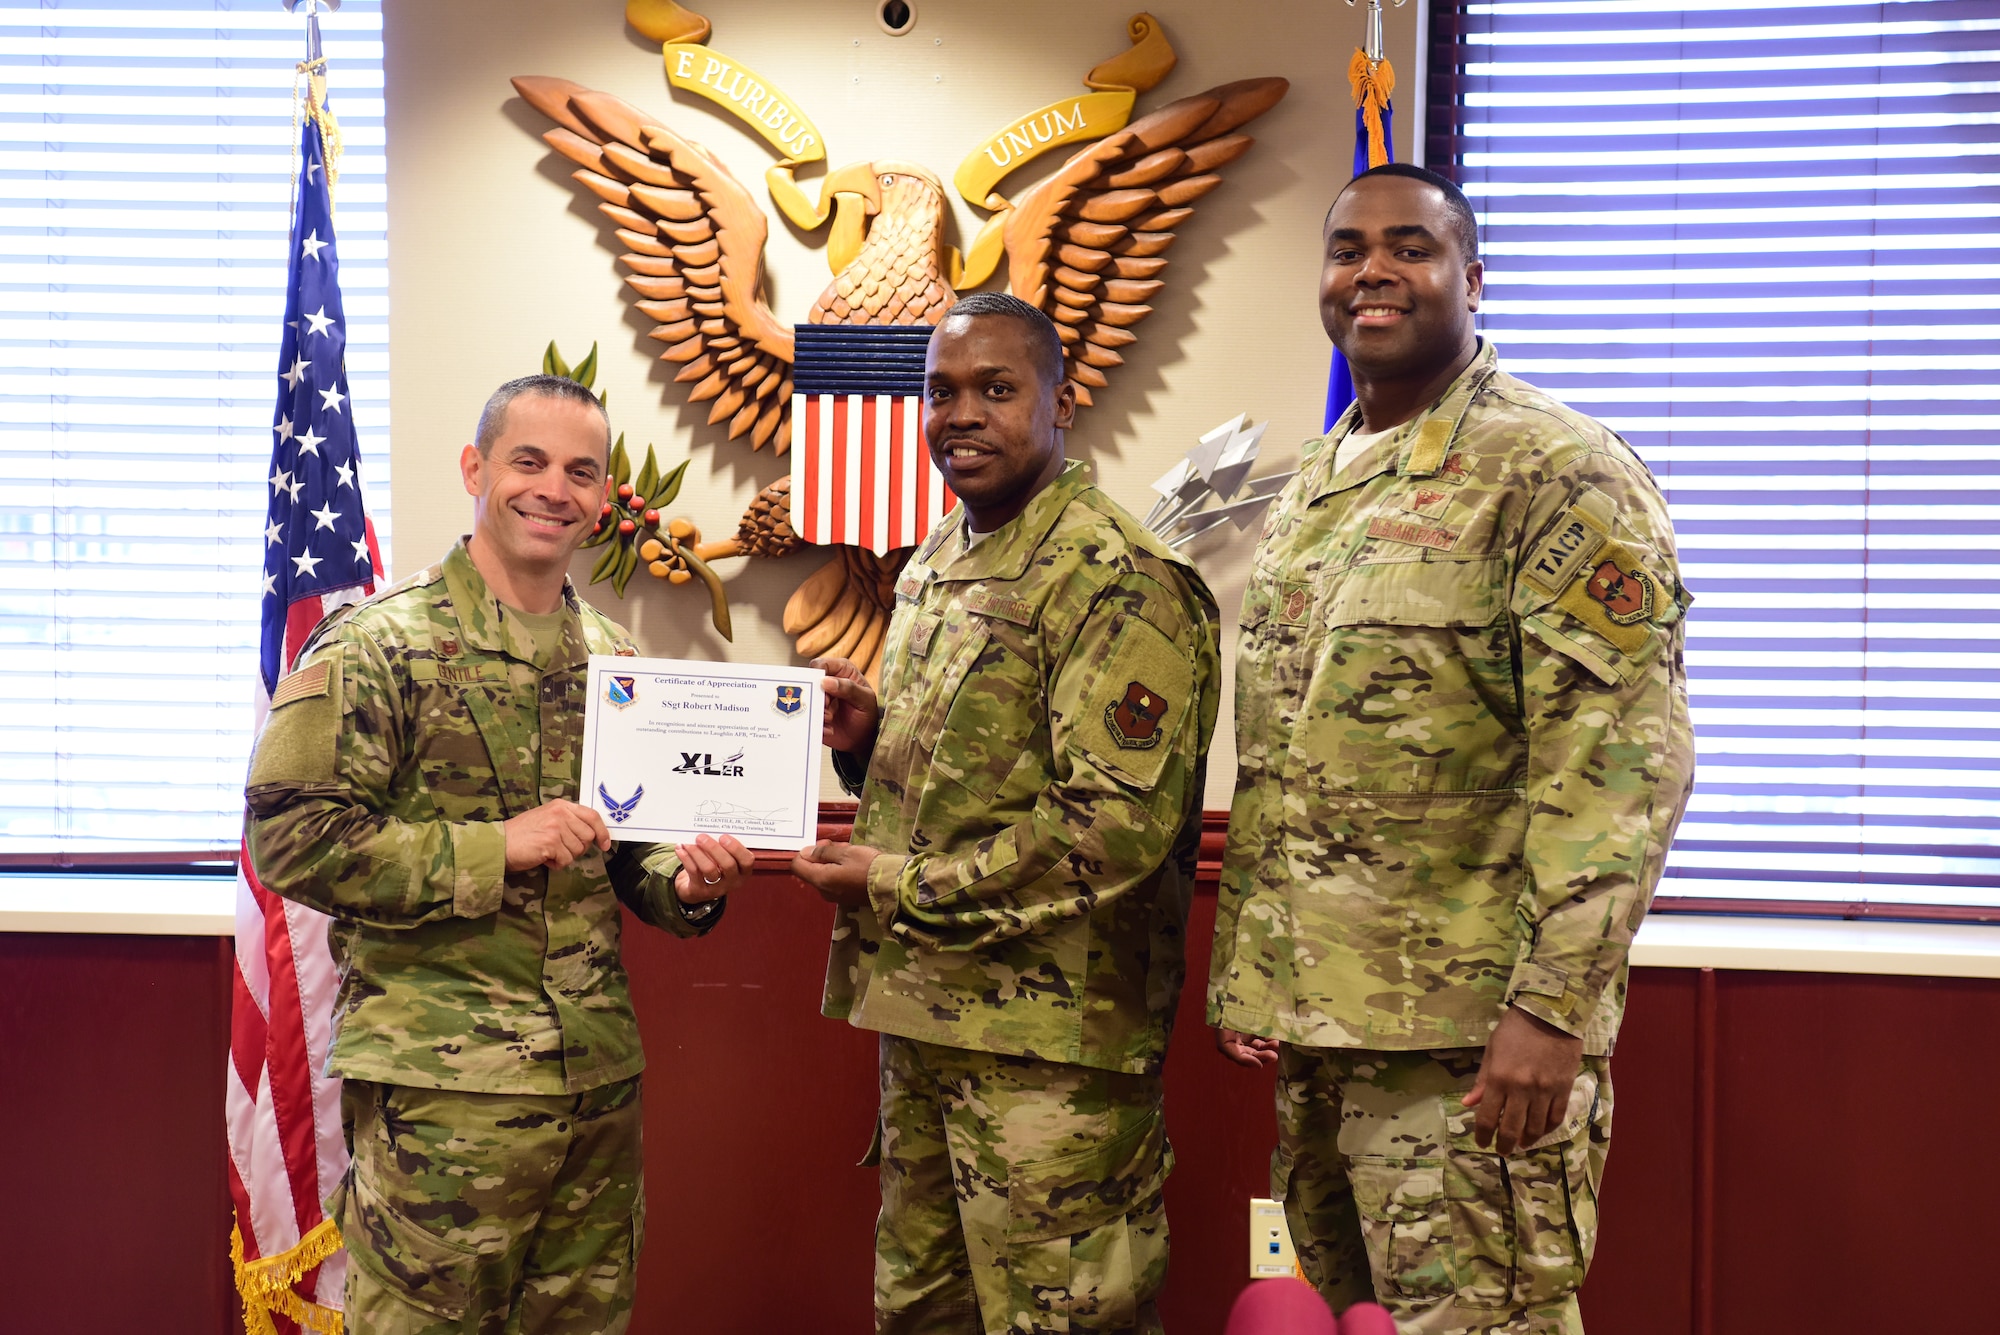 Staff Sgt. Robert Madison, 47th Flying Training Wing NCO in charge of wing administration, accepts the “XLer of the week” award from Col. Lee Gentile, the 47th Flying Training Wing Commander, and Chief Master Sgt. Robert L. Zackery III, 47th FTW command chief master sergeant, on Feb. 14, 2020 at Laughlin Air Force Base, Texas. The “XLer of the Week” award is given to those who consistently make outstanding contributions to their unit and the Laughlin mission. (U.S. Air Force photo by Senior Airman John A. Crawford)